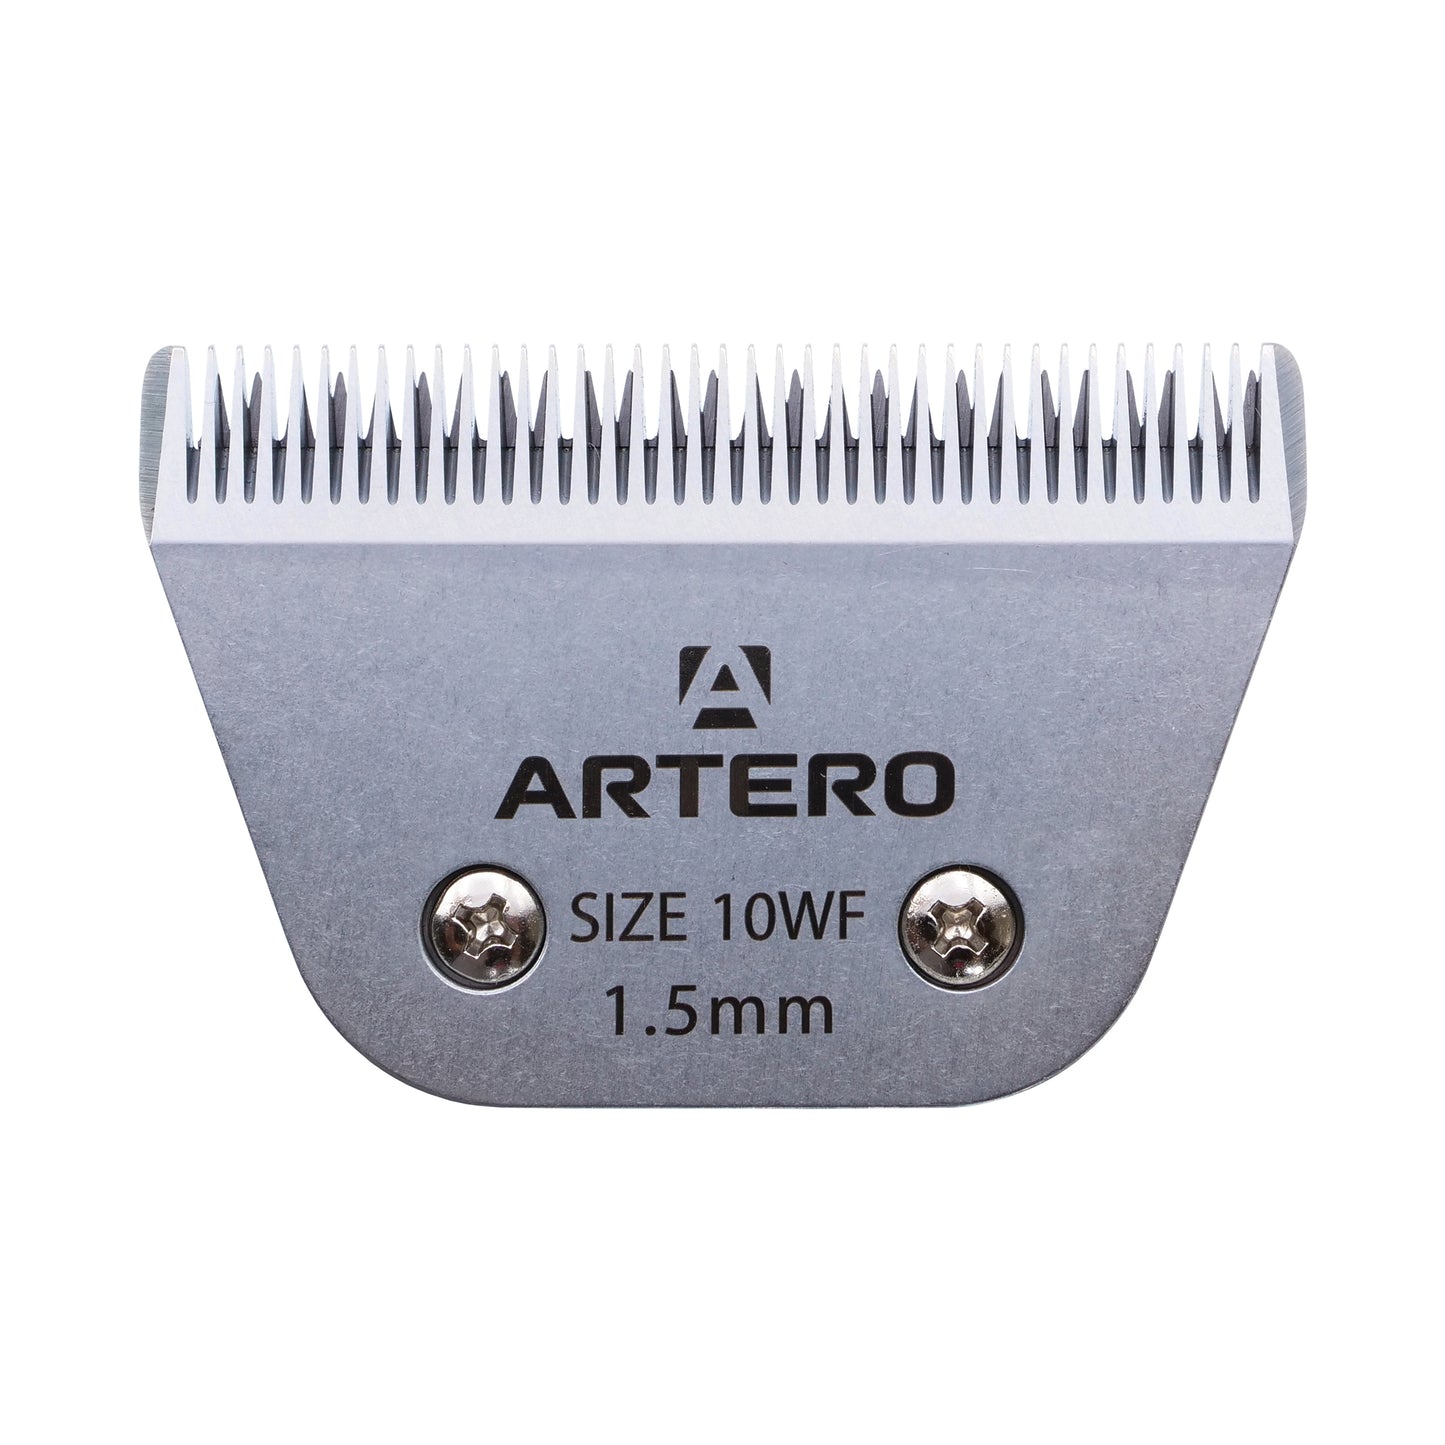 Artero Wide Clipper Blade #10WF for Professional Pet Grooming saves time. These wide clipper blades provide faster cuts avoiding correcting uneven textures and markings. The #10Wf blade works with guards. Compatible with A5 clippers including Artero, Andis, Moser, Heiniger, Oster, and Aesculap Fav5 and Fav5 CL models.